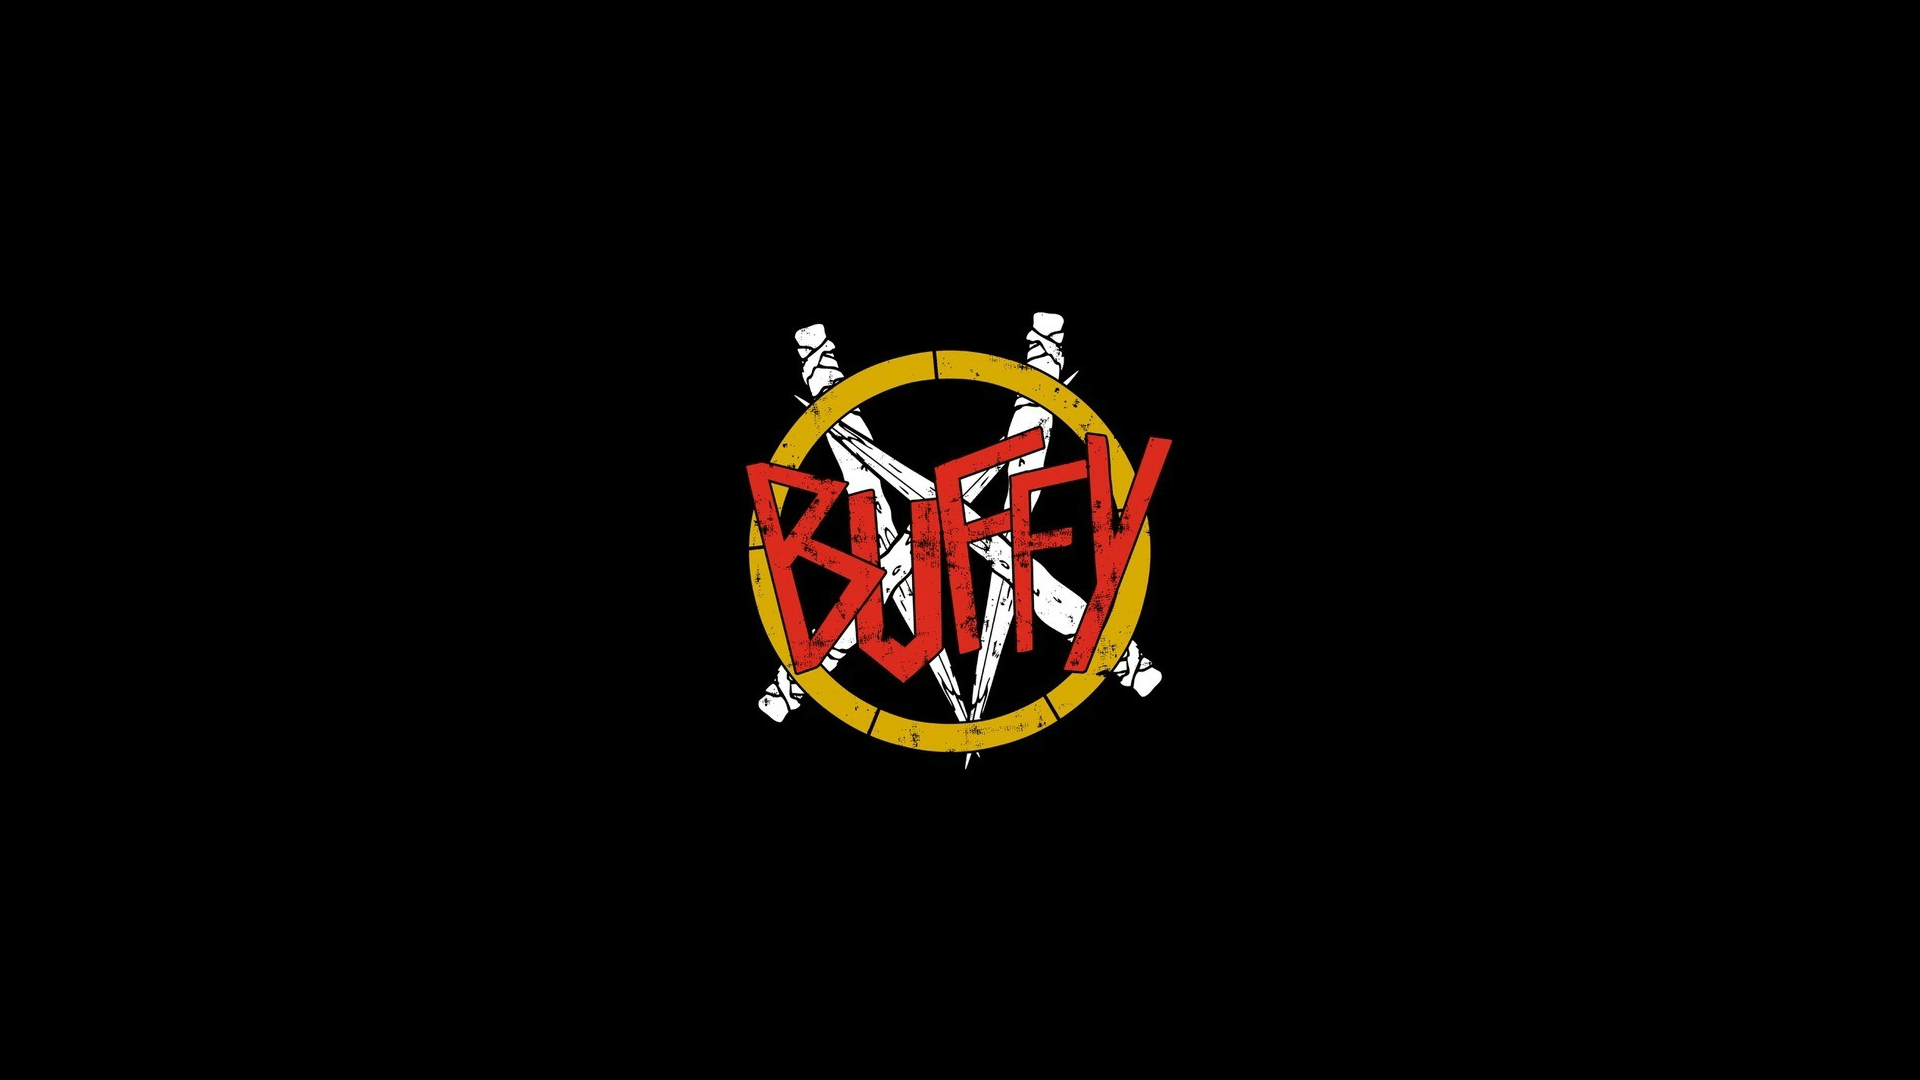 I Found The Buffy Slayer T Shirt Logo, Did Some Magic, And Made It